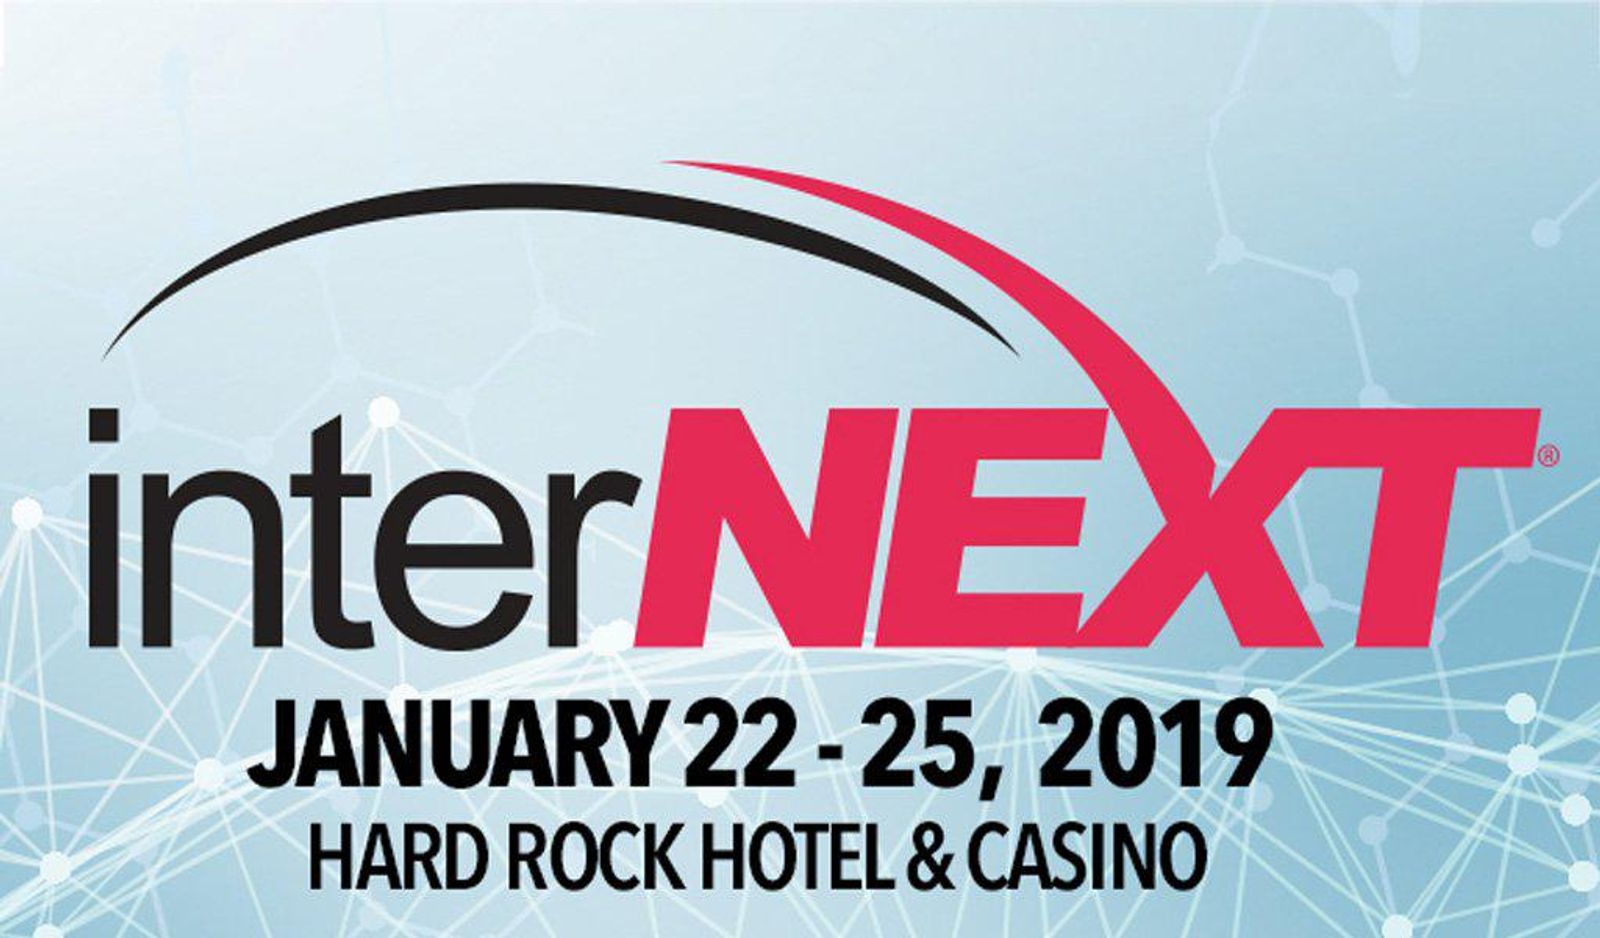 Pay-Site Executive Roundtable Kicks Off Internext 2019